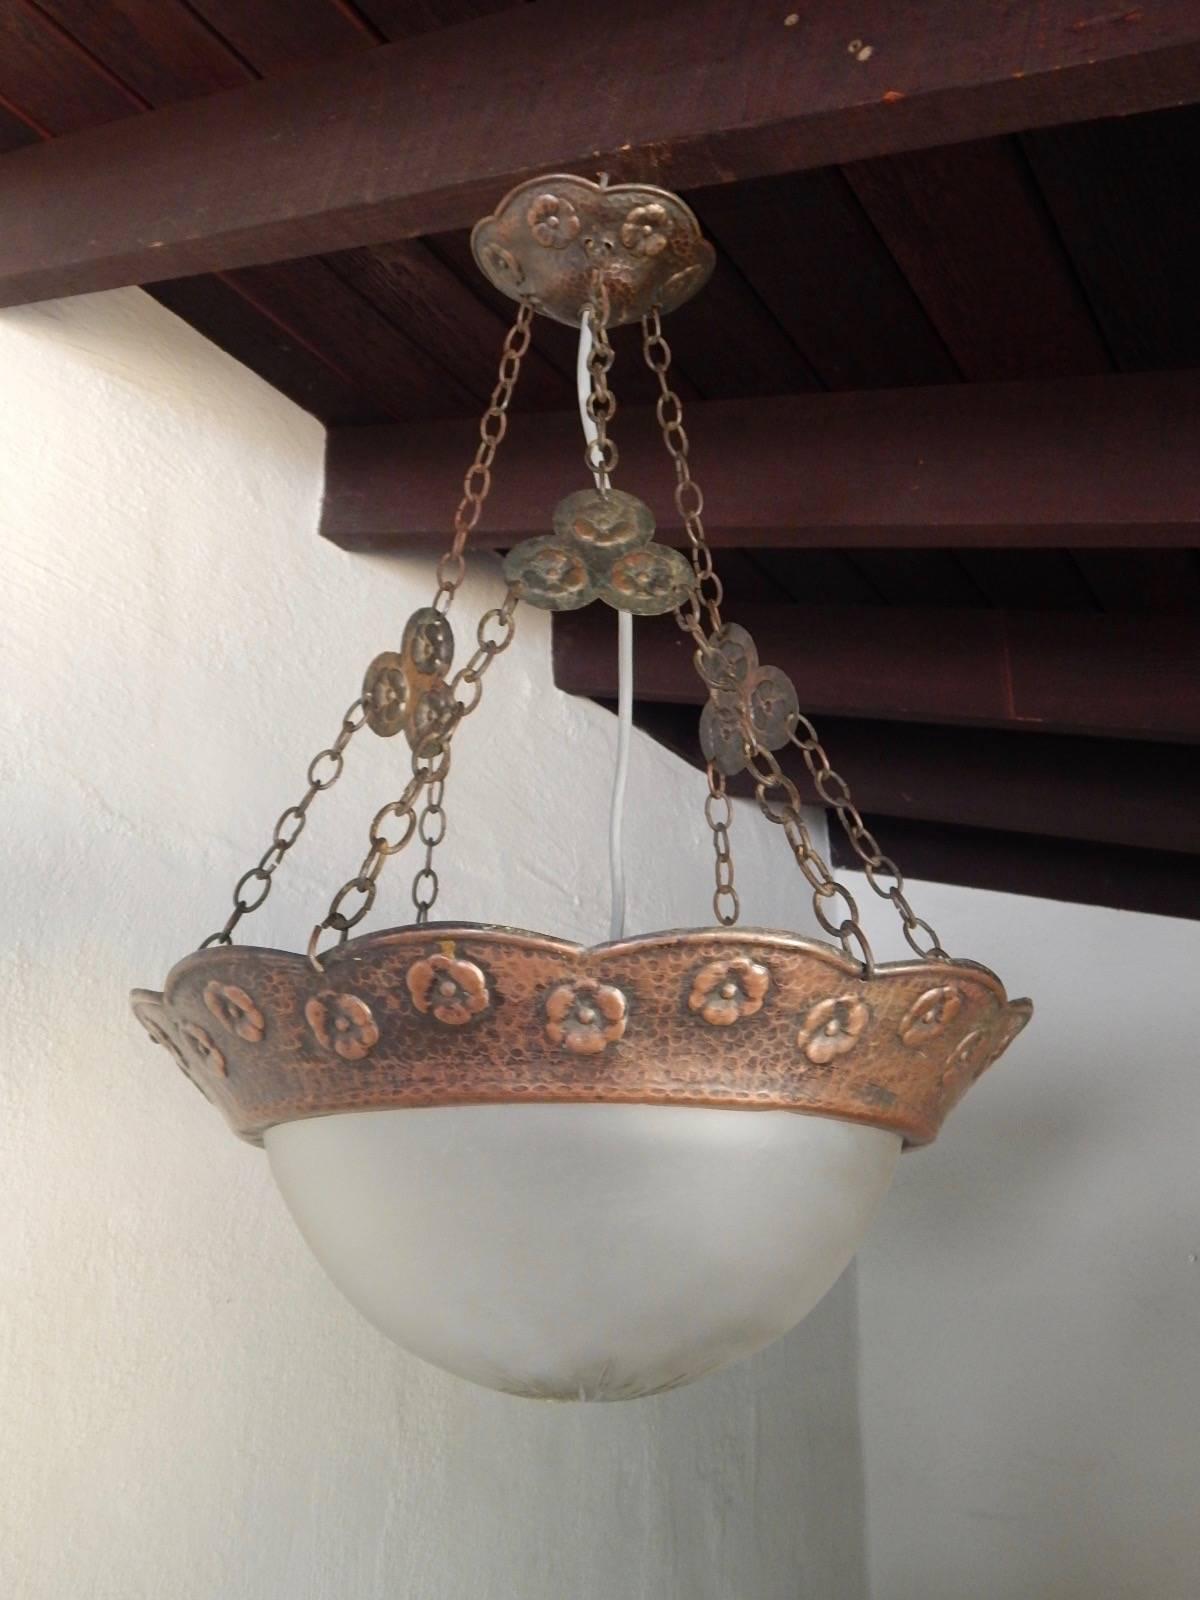 Swedish Arts & Crafts are hammered copper hanging light fixture, circa 1910. With One standard base bulb receptacle that hangs into original glass bowl. With hammered floral motifs. Price includes rewiring. Contact is with any questions.